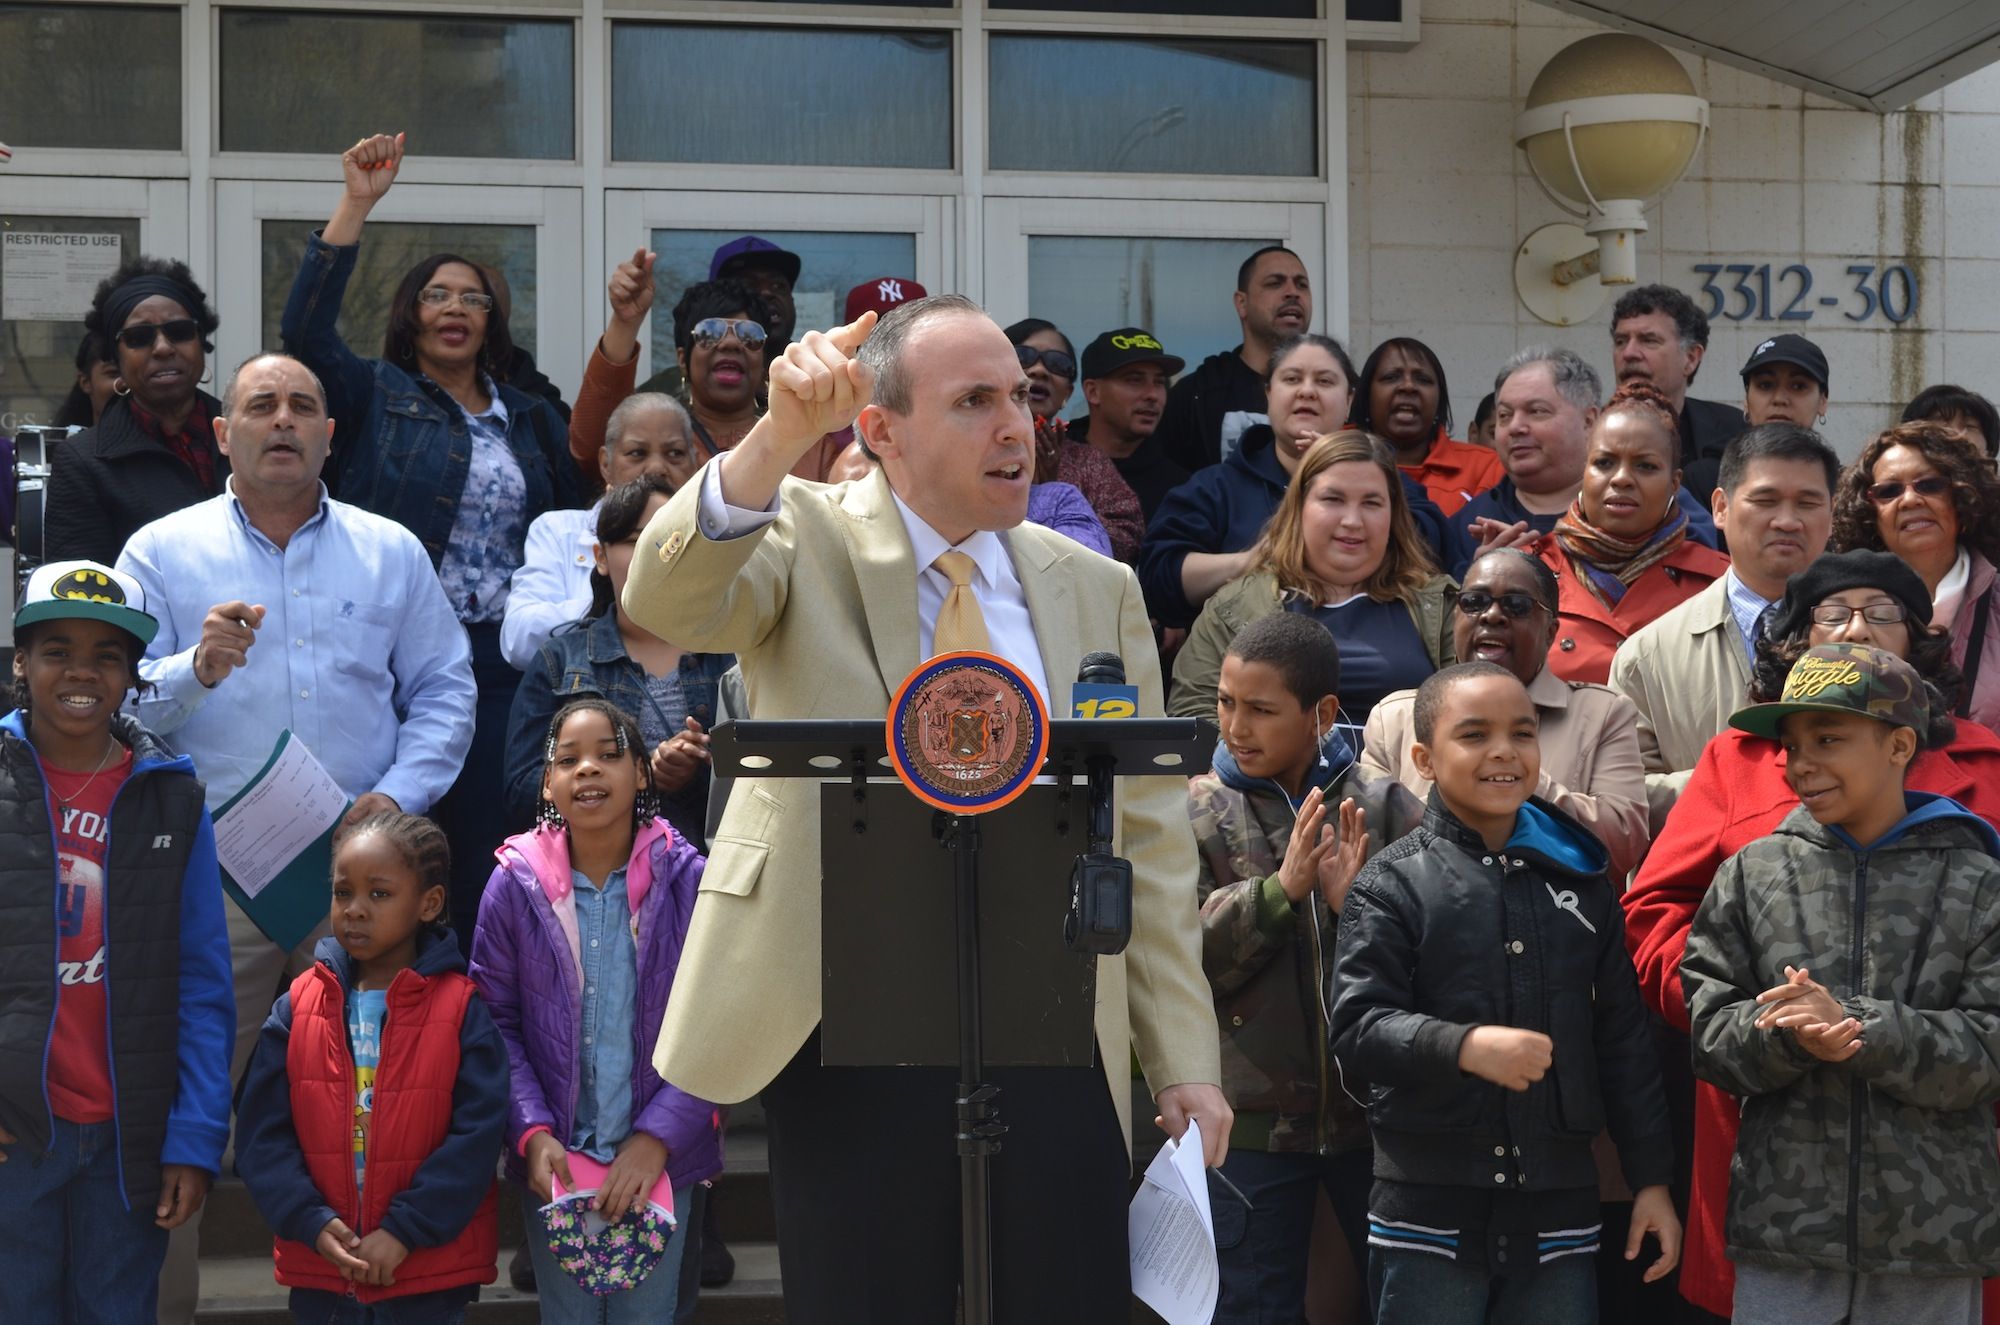 City Councilman Mark Treyger joined with Coney Island residents to demand the city purchase the former F.E.G.S. building. (Photo: Alex Ellefson / Sheepshead Bites)